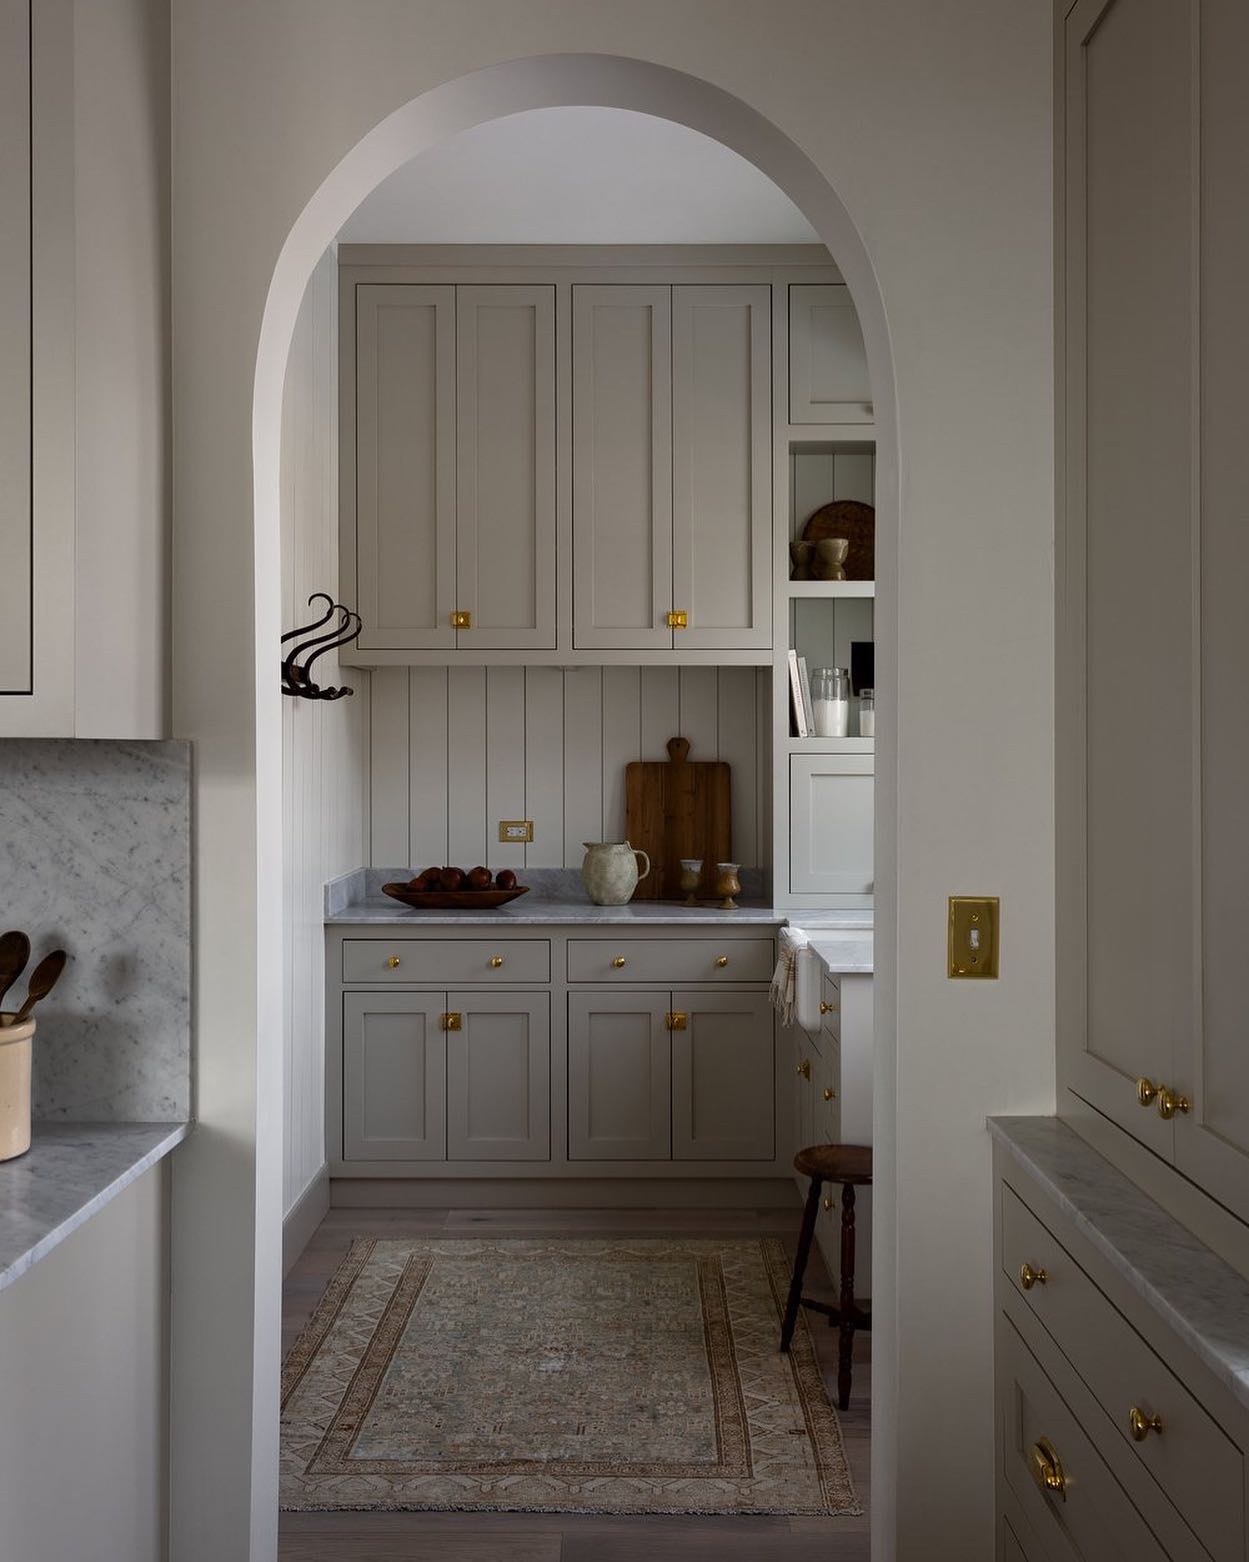 MORE CABINET SPACE IN A BUTLER'S PANTRY